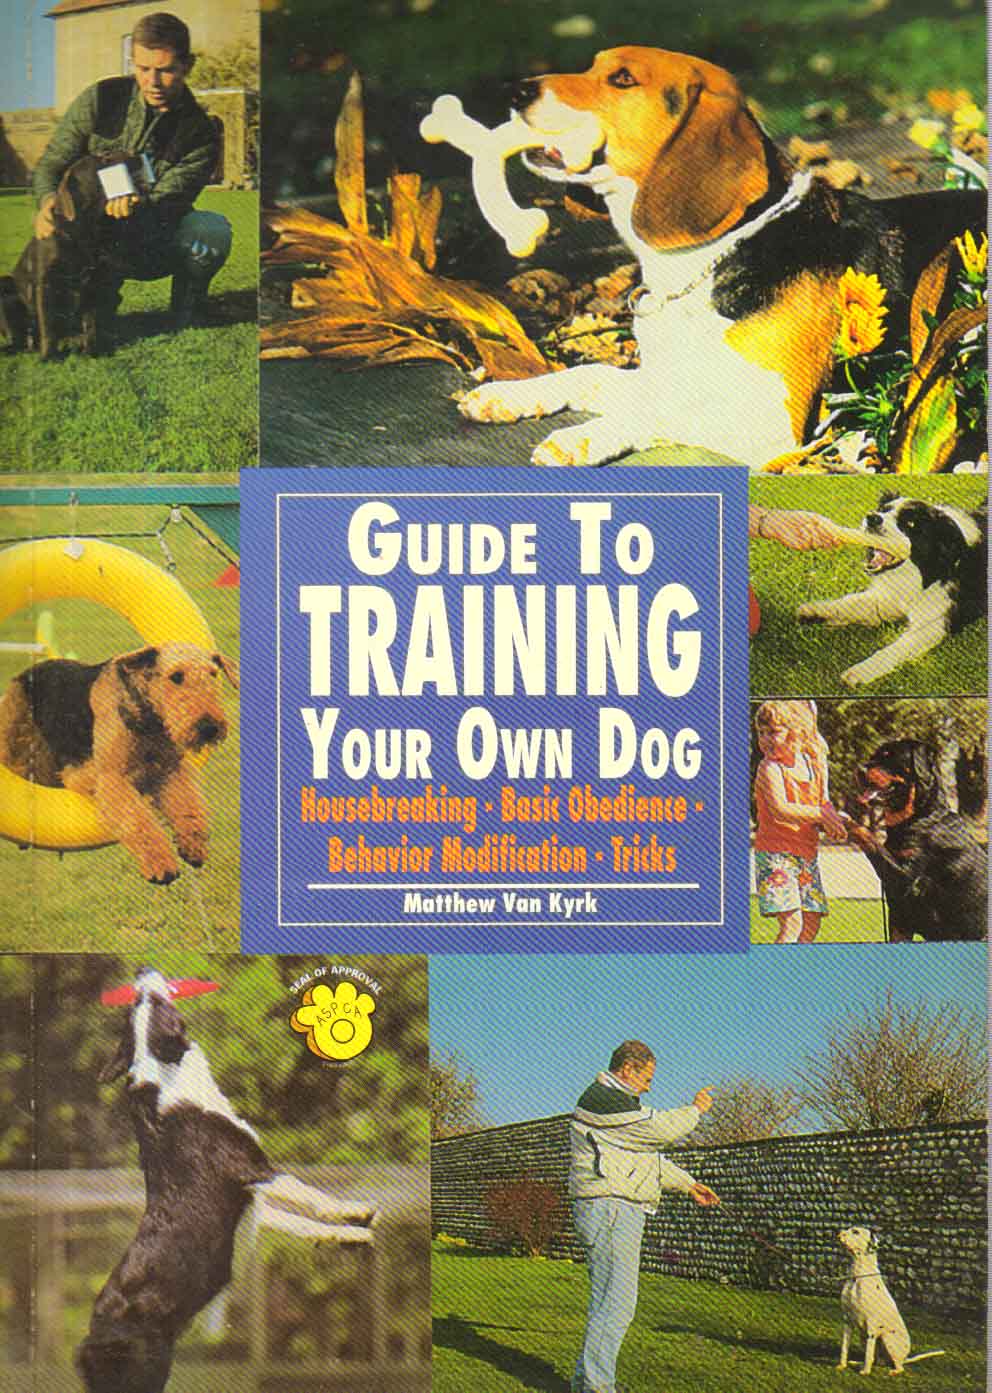 Guide to Training Your Own Dog.